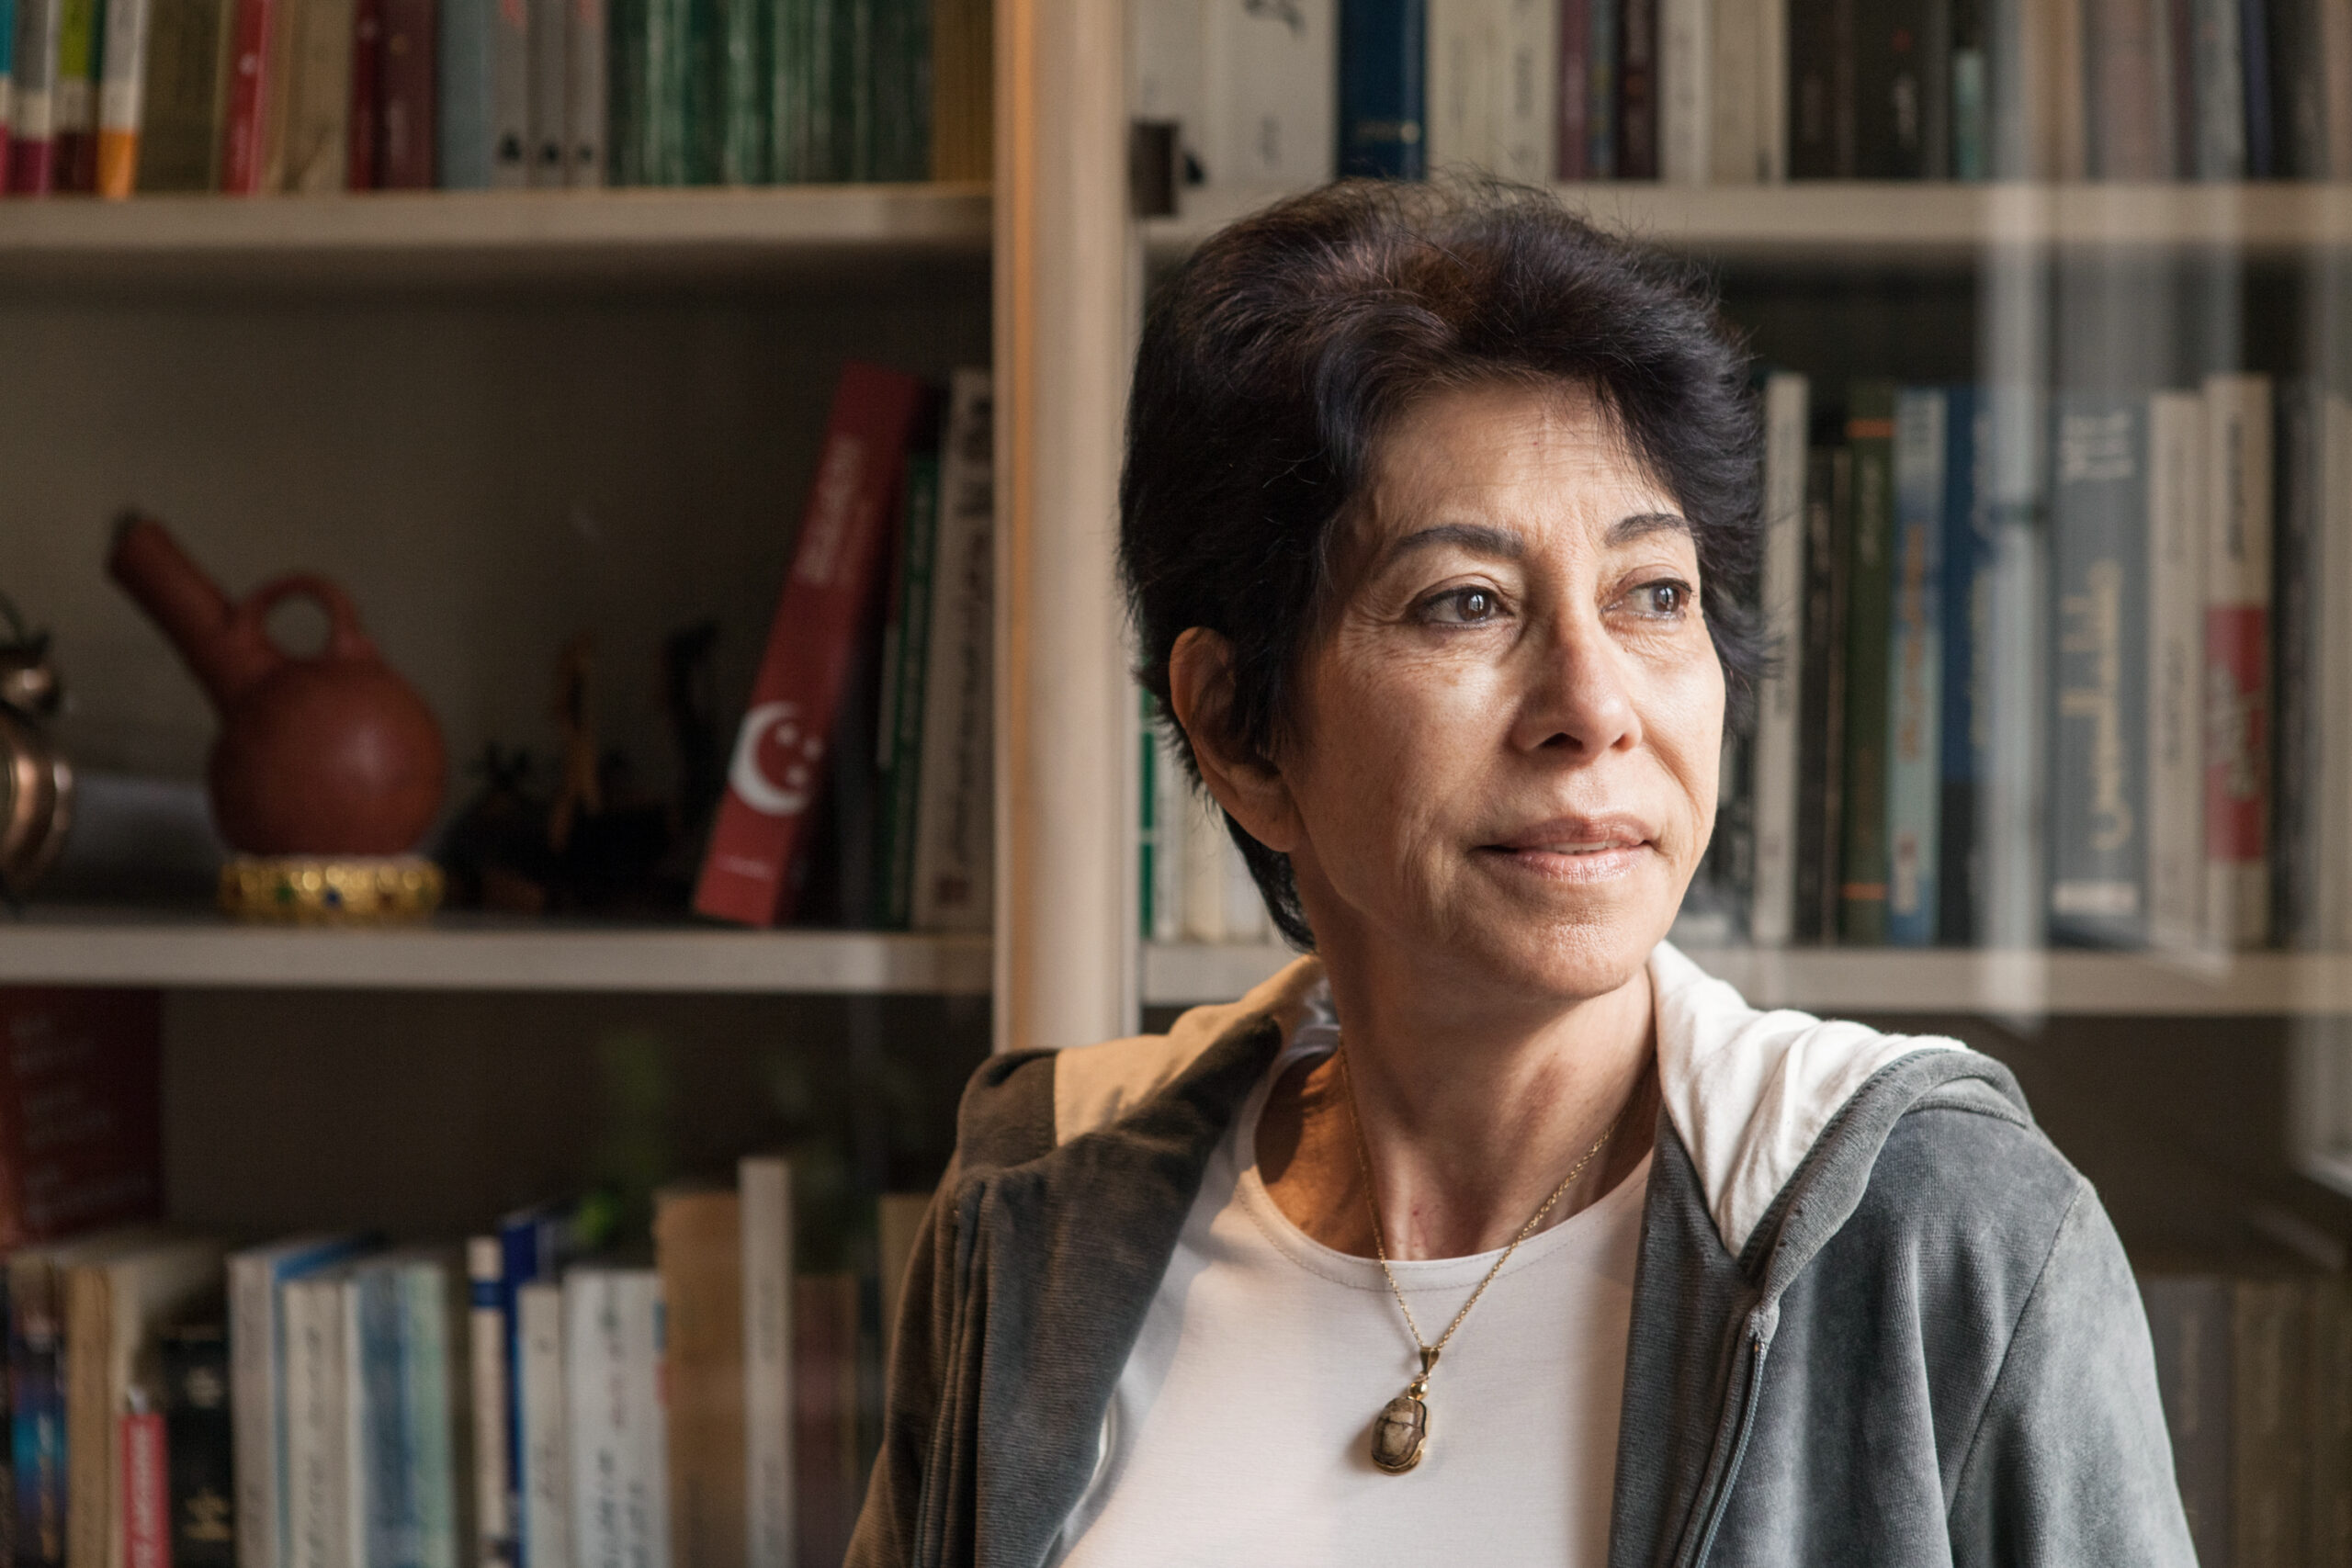 Eglal, 73 years old, was born in Middle Egypt and lives in Cairo, she is a professor in the Faculty of Political Science, University of Cairo, „There are many thing in the Arab world, which are not out in the open, which are taboo“, EGY, SAYEDA, Femmes d‘